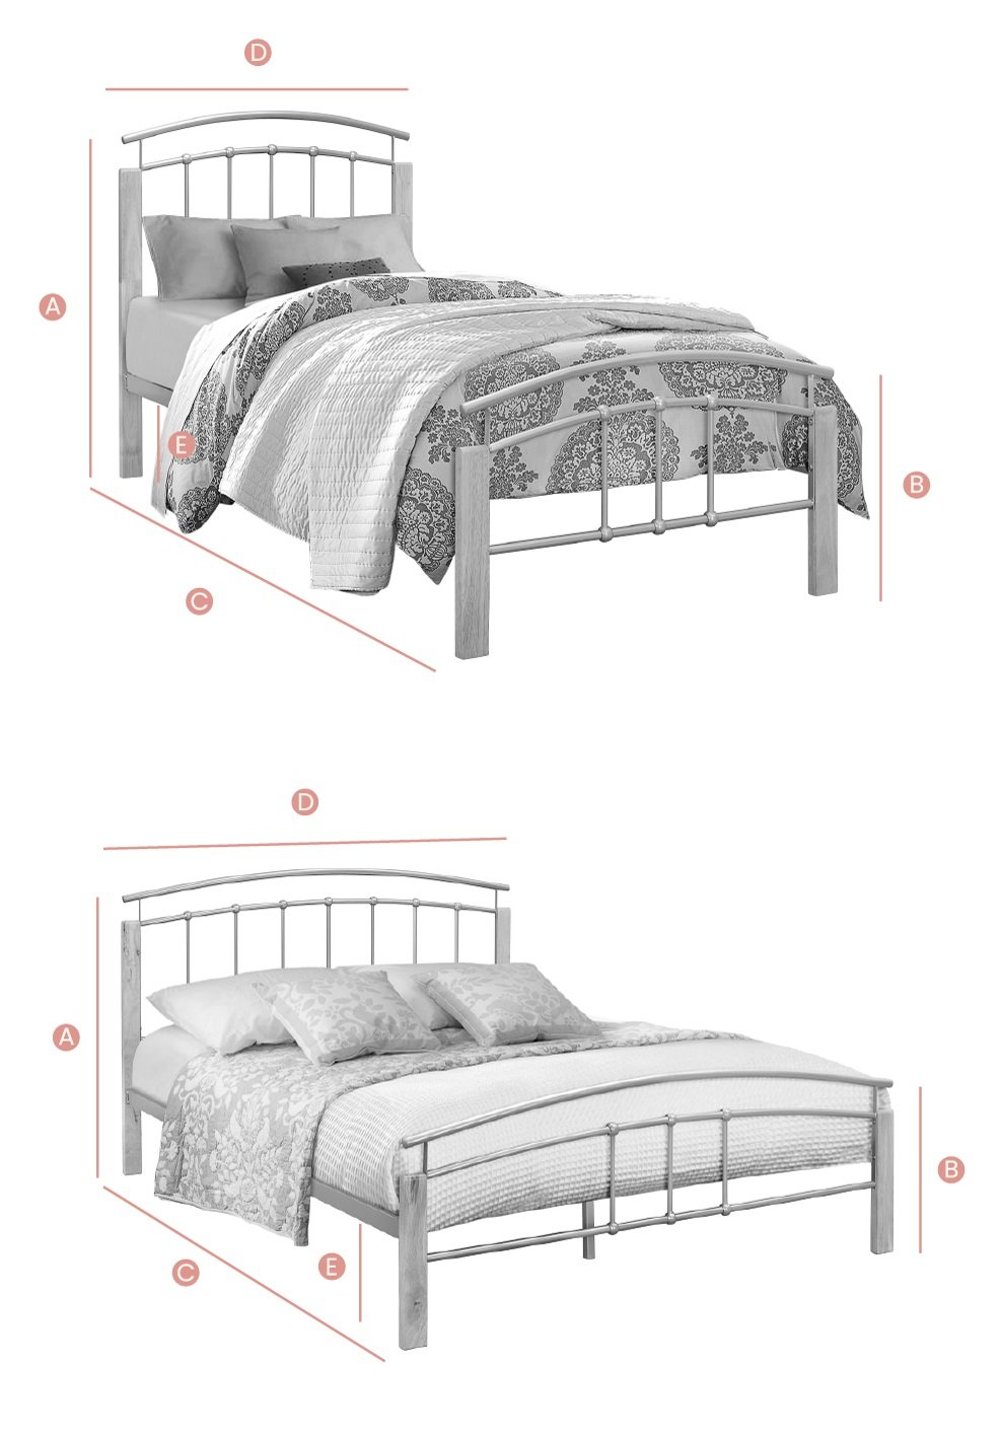 Tetras Beech Wooden and Metal Single Bed Sketch Dimensions